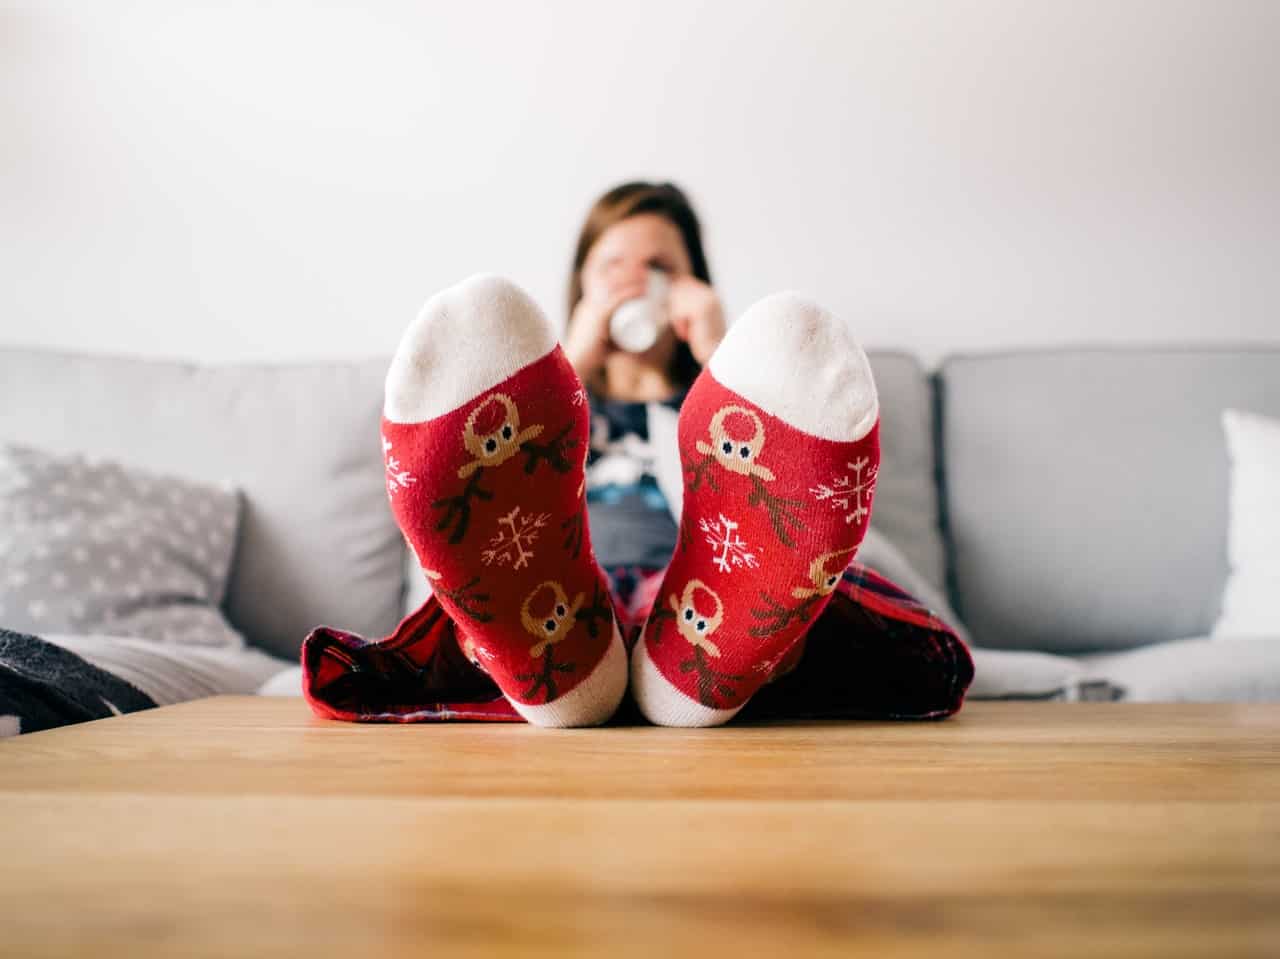 Saving Money | The Christmas season can be a very stressful holiday both emotionally and financially. Learn 5 Ways to Save Money for  a Stress Free Christmas. #savingmoney #moneysavingtips #personalfinance #holidays